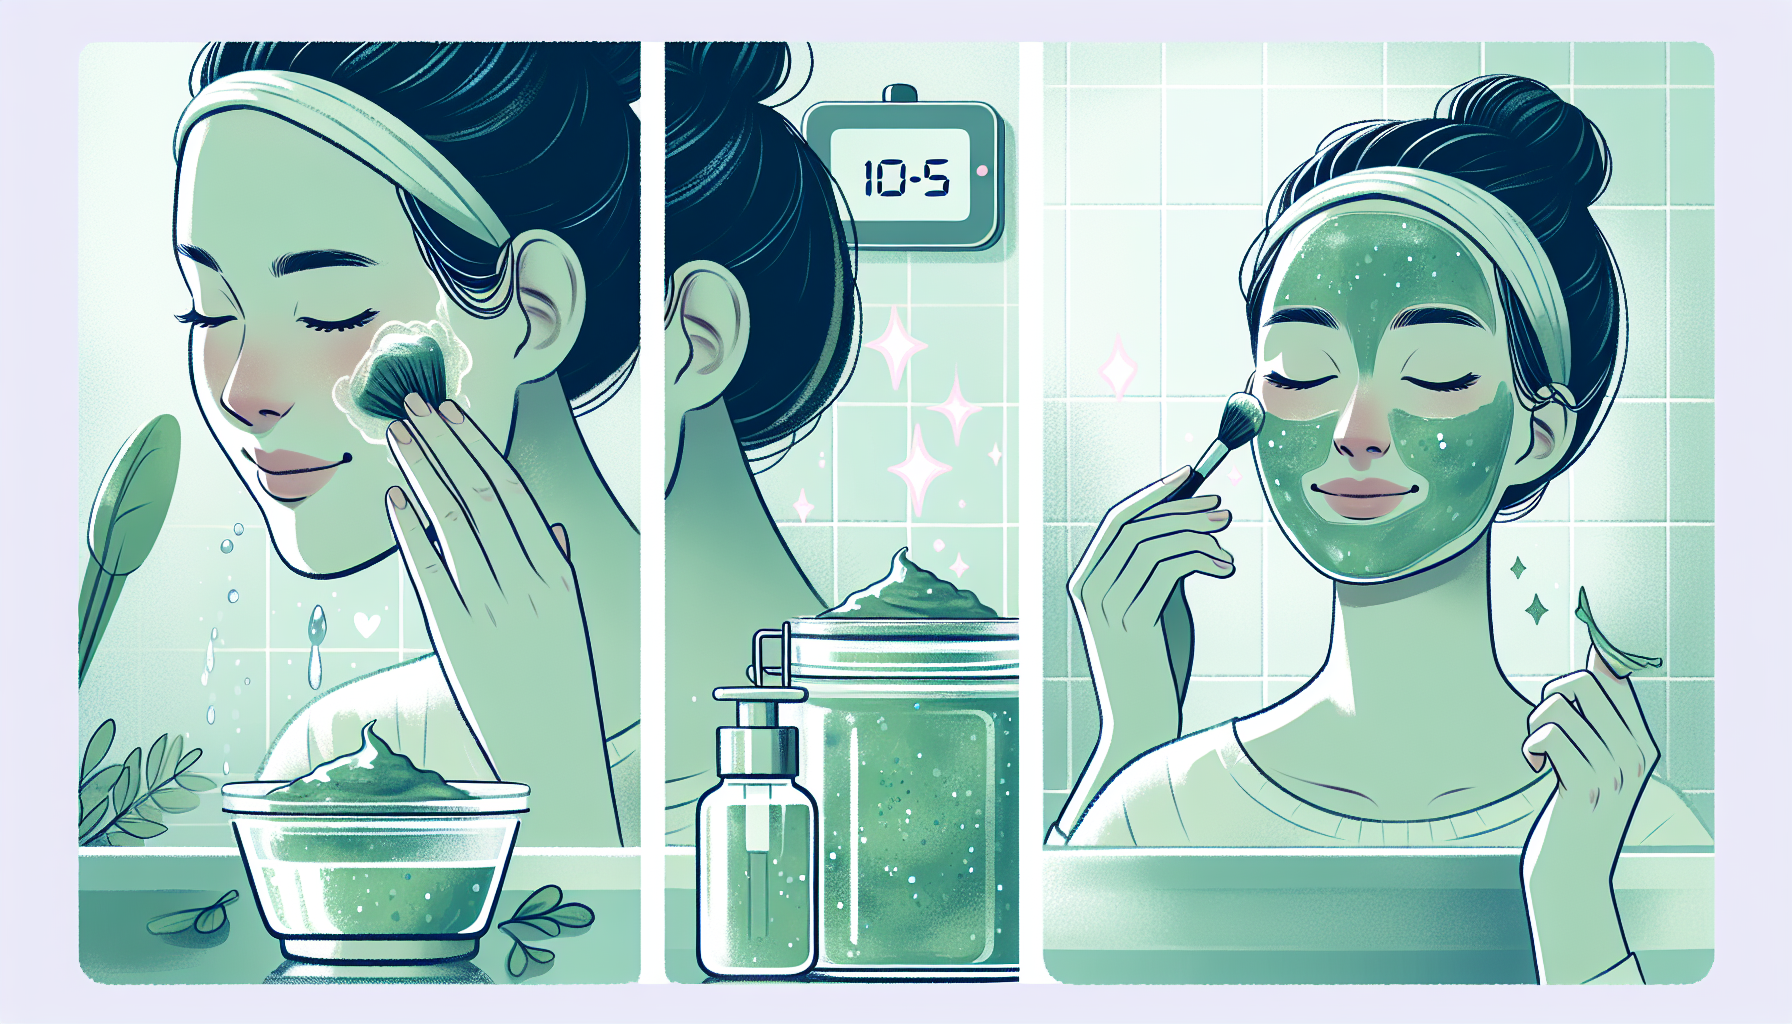 An illustration showing the proper steps for applying sea moss on the face